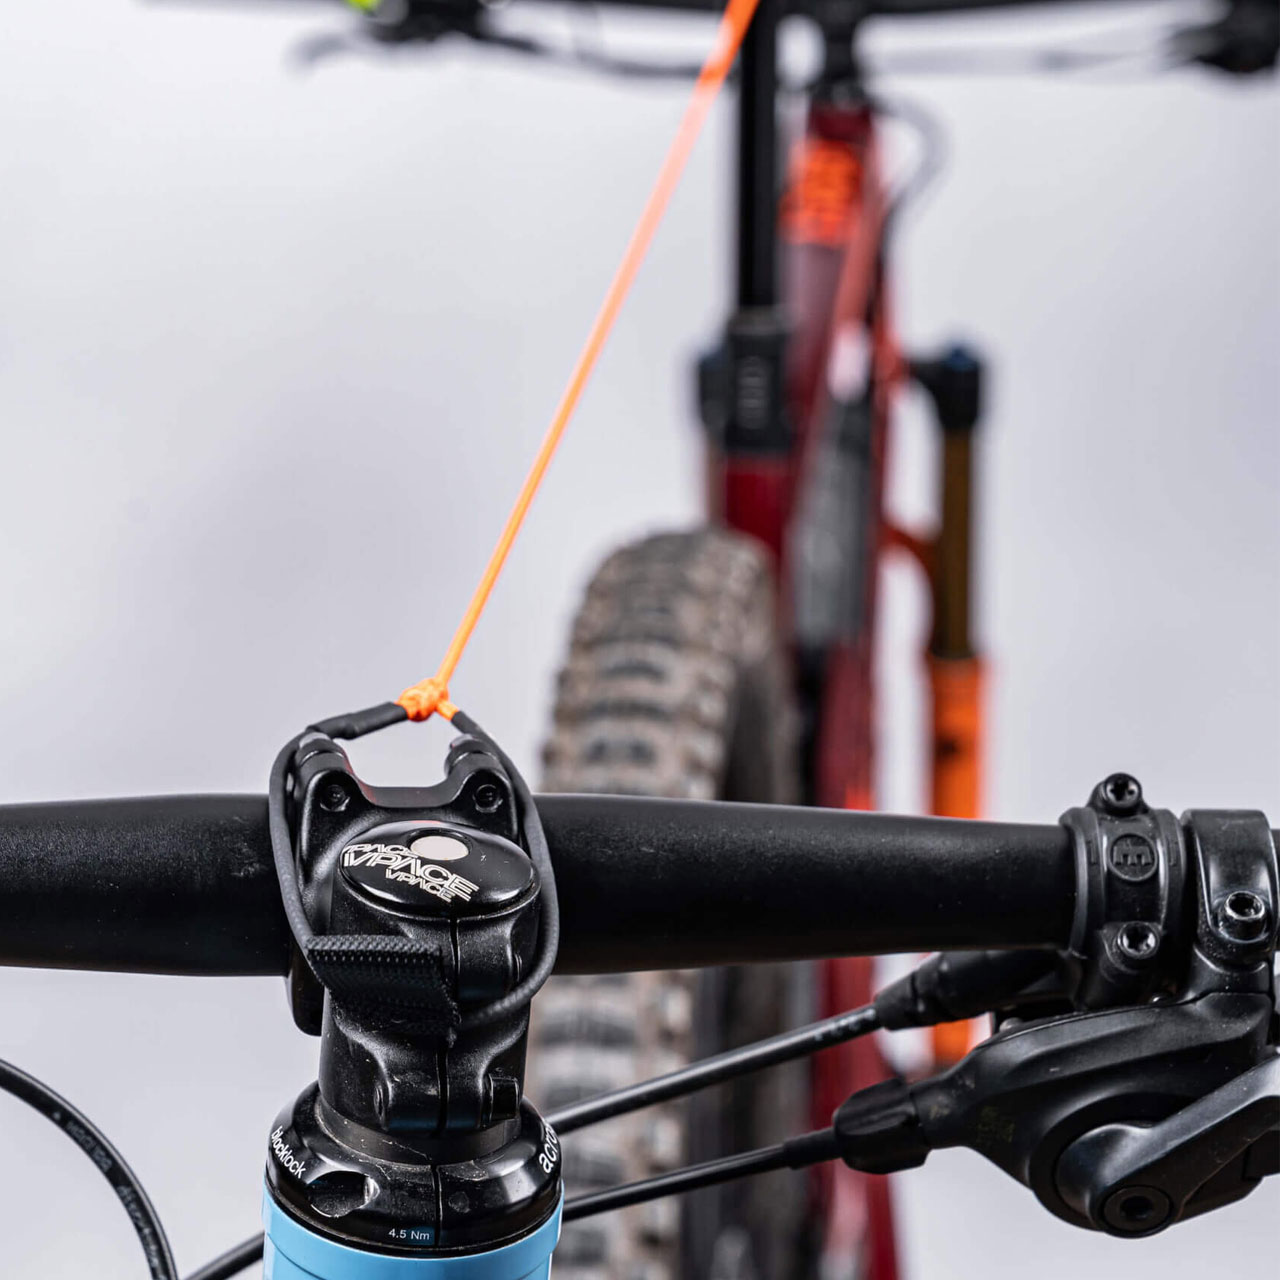 Kommit tow rope, bicycle towing system